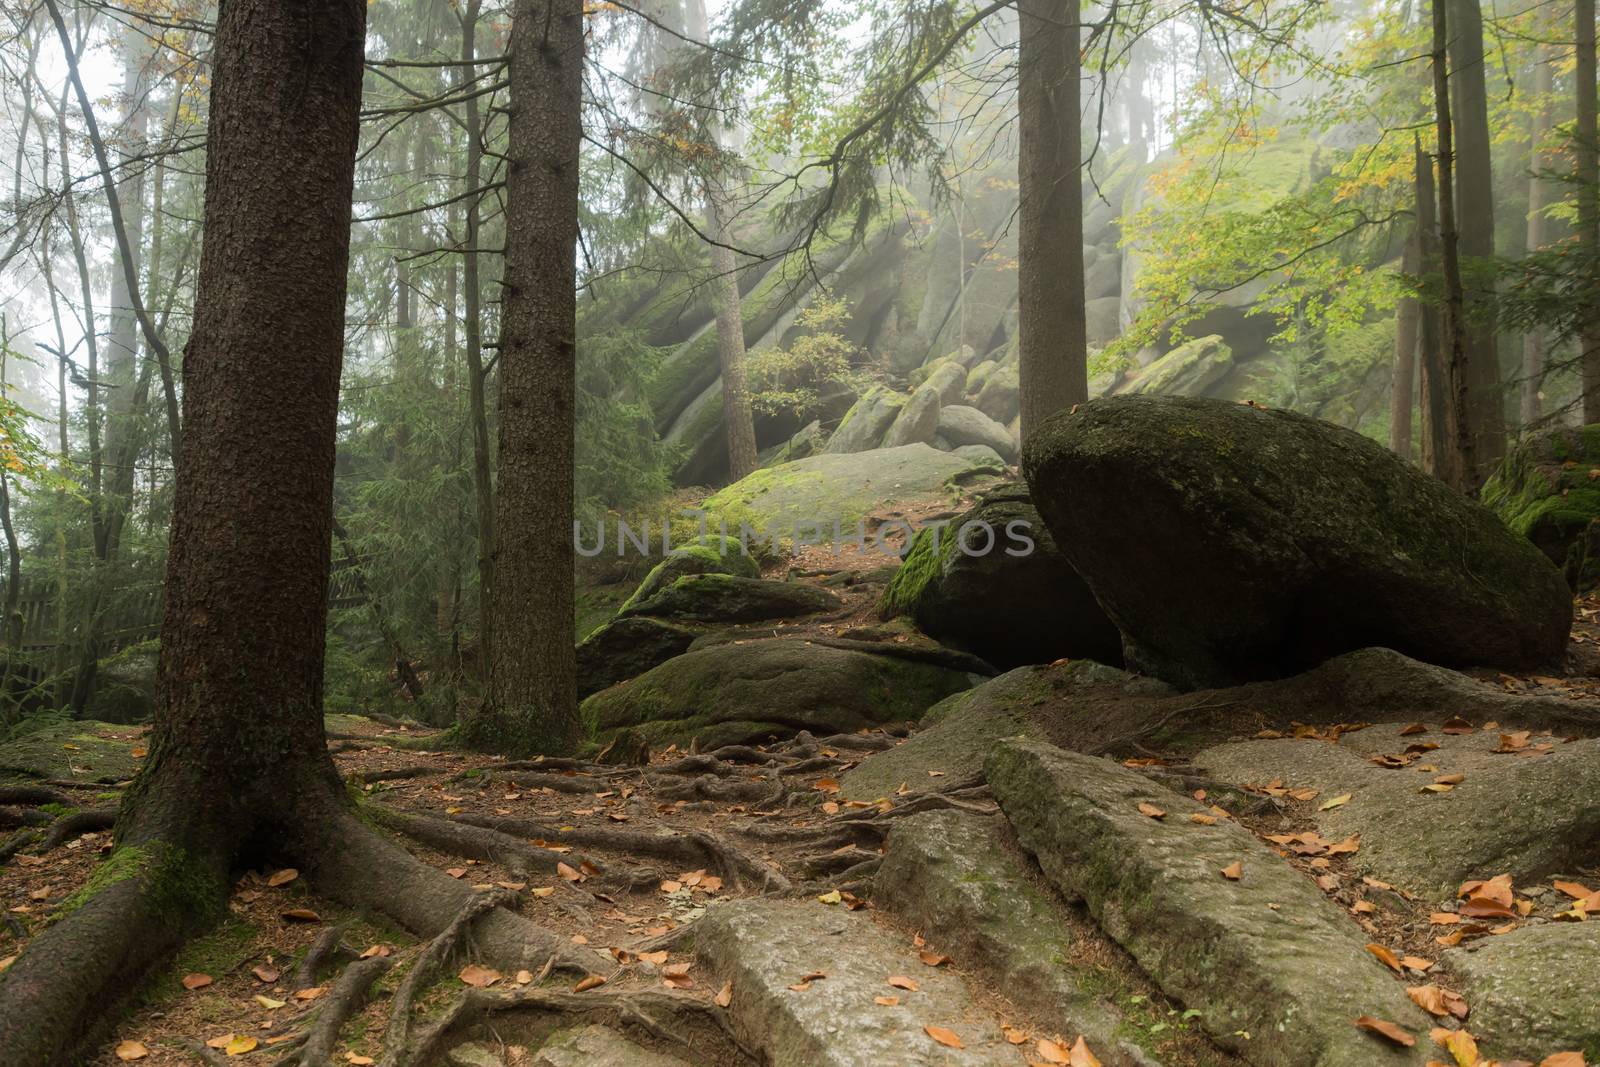 Huge rocks in the forest